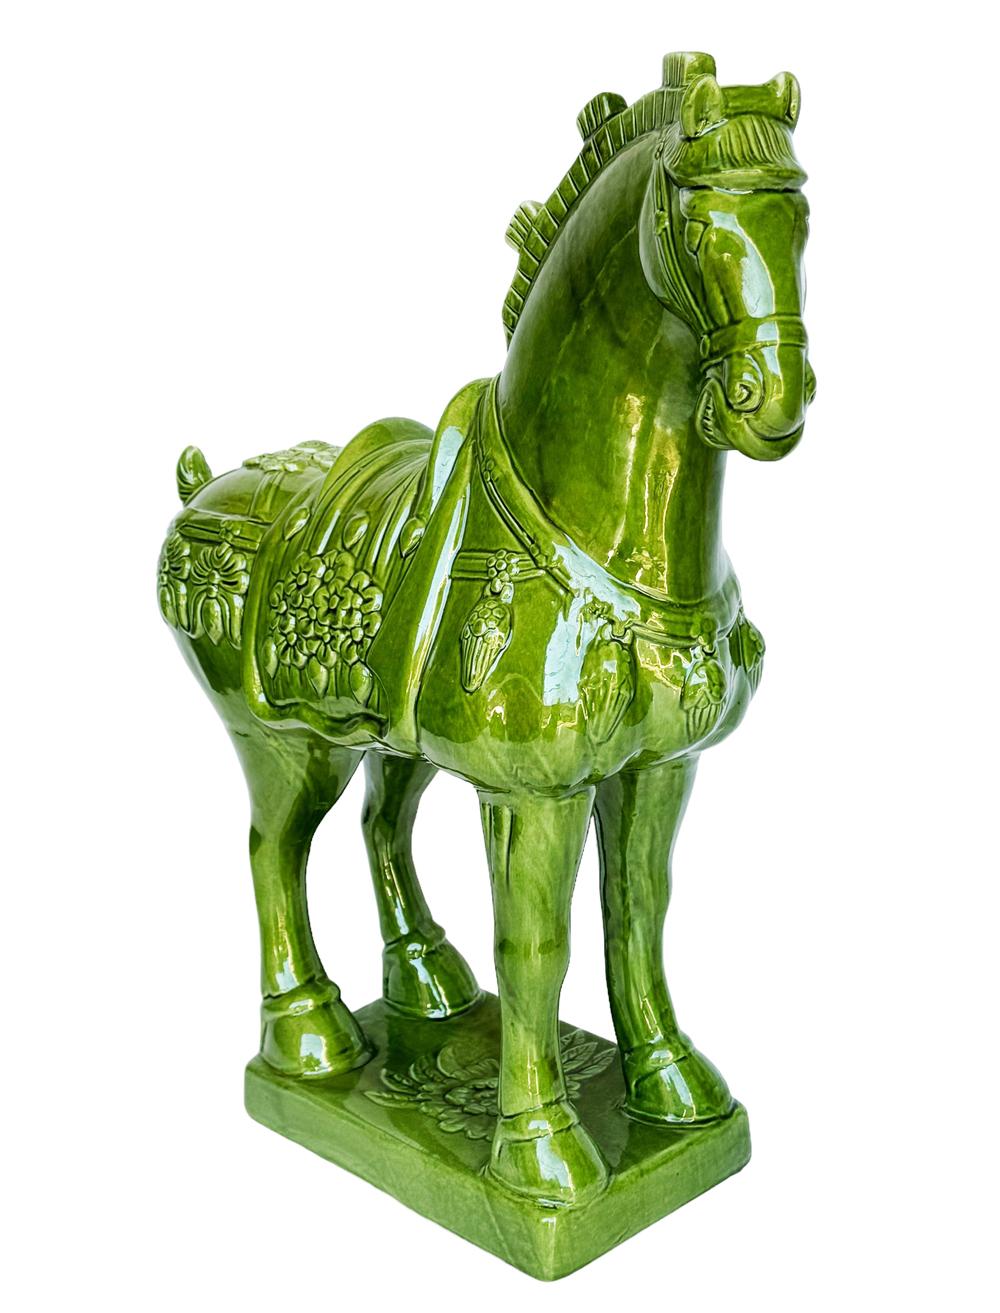 Mid-20th Century Large Mid-Century Italian Modern Green Ceramic Horse Pottery Sculpture or Statue For Sale